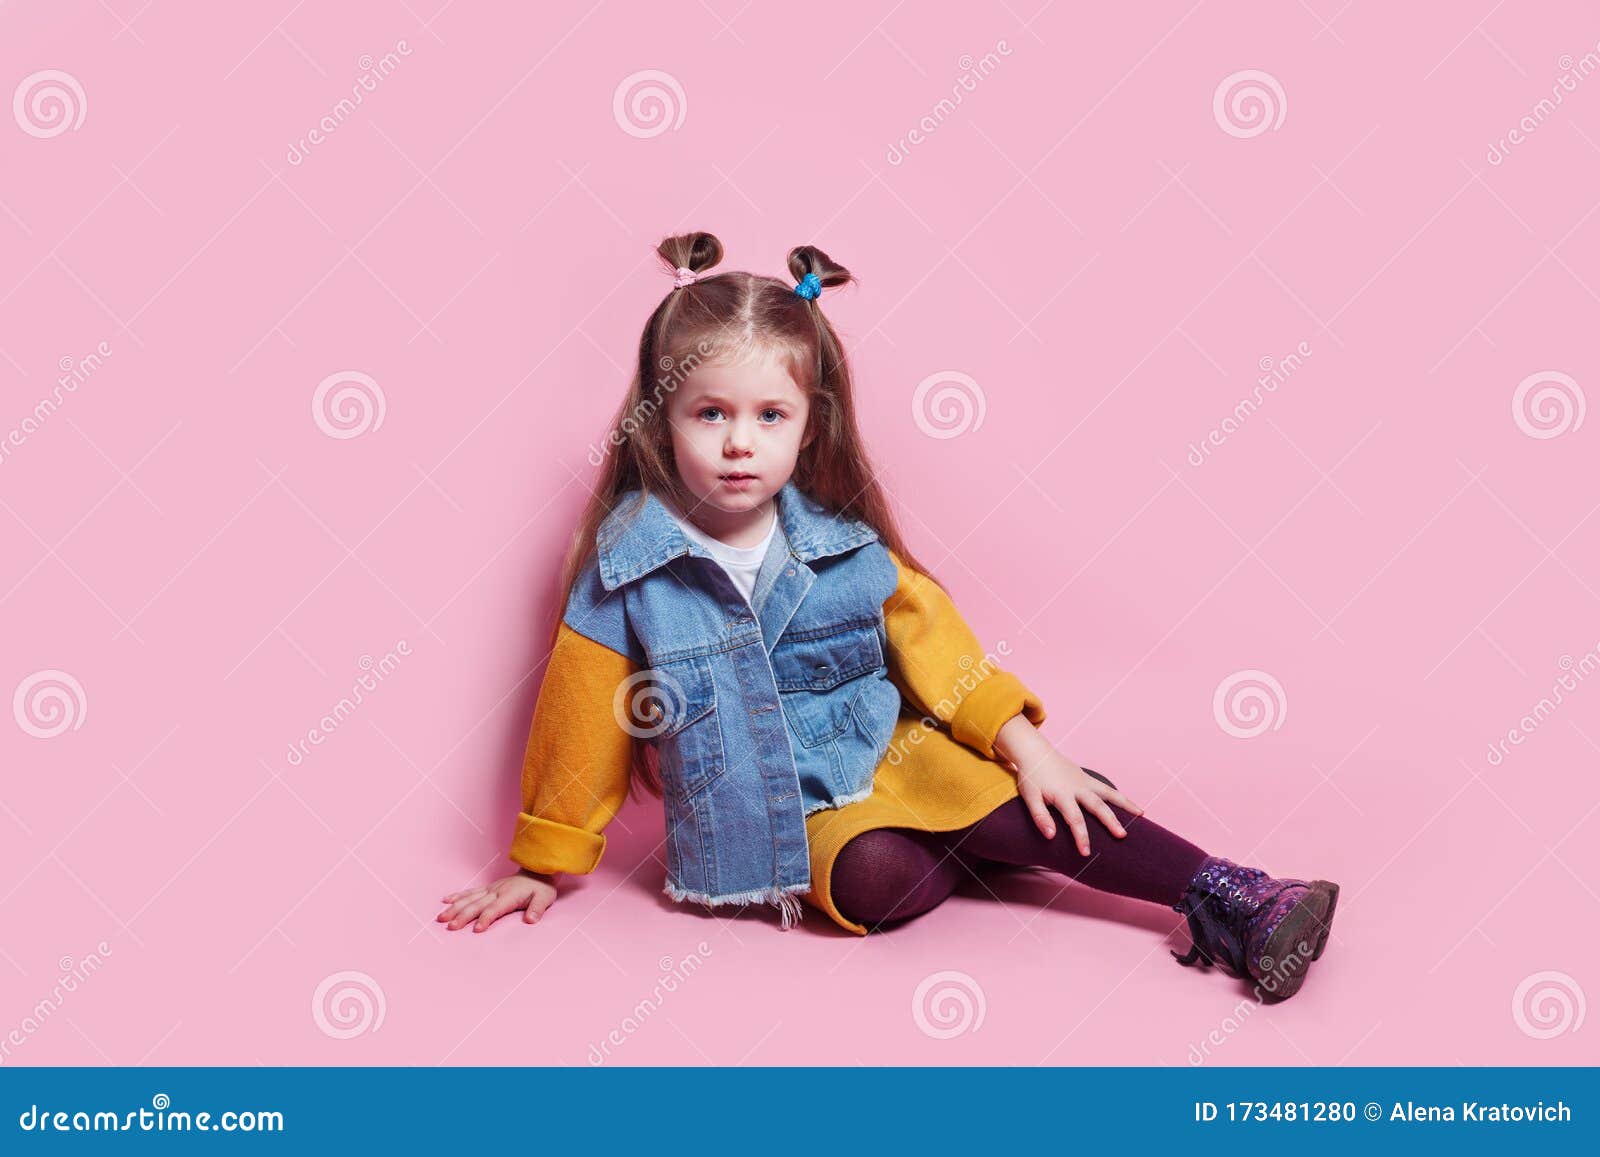 Stylish Baby Girl 4-5 Year Old Wearing Denim Clothes Posing on ...